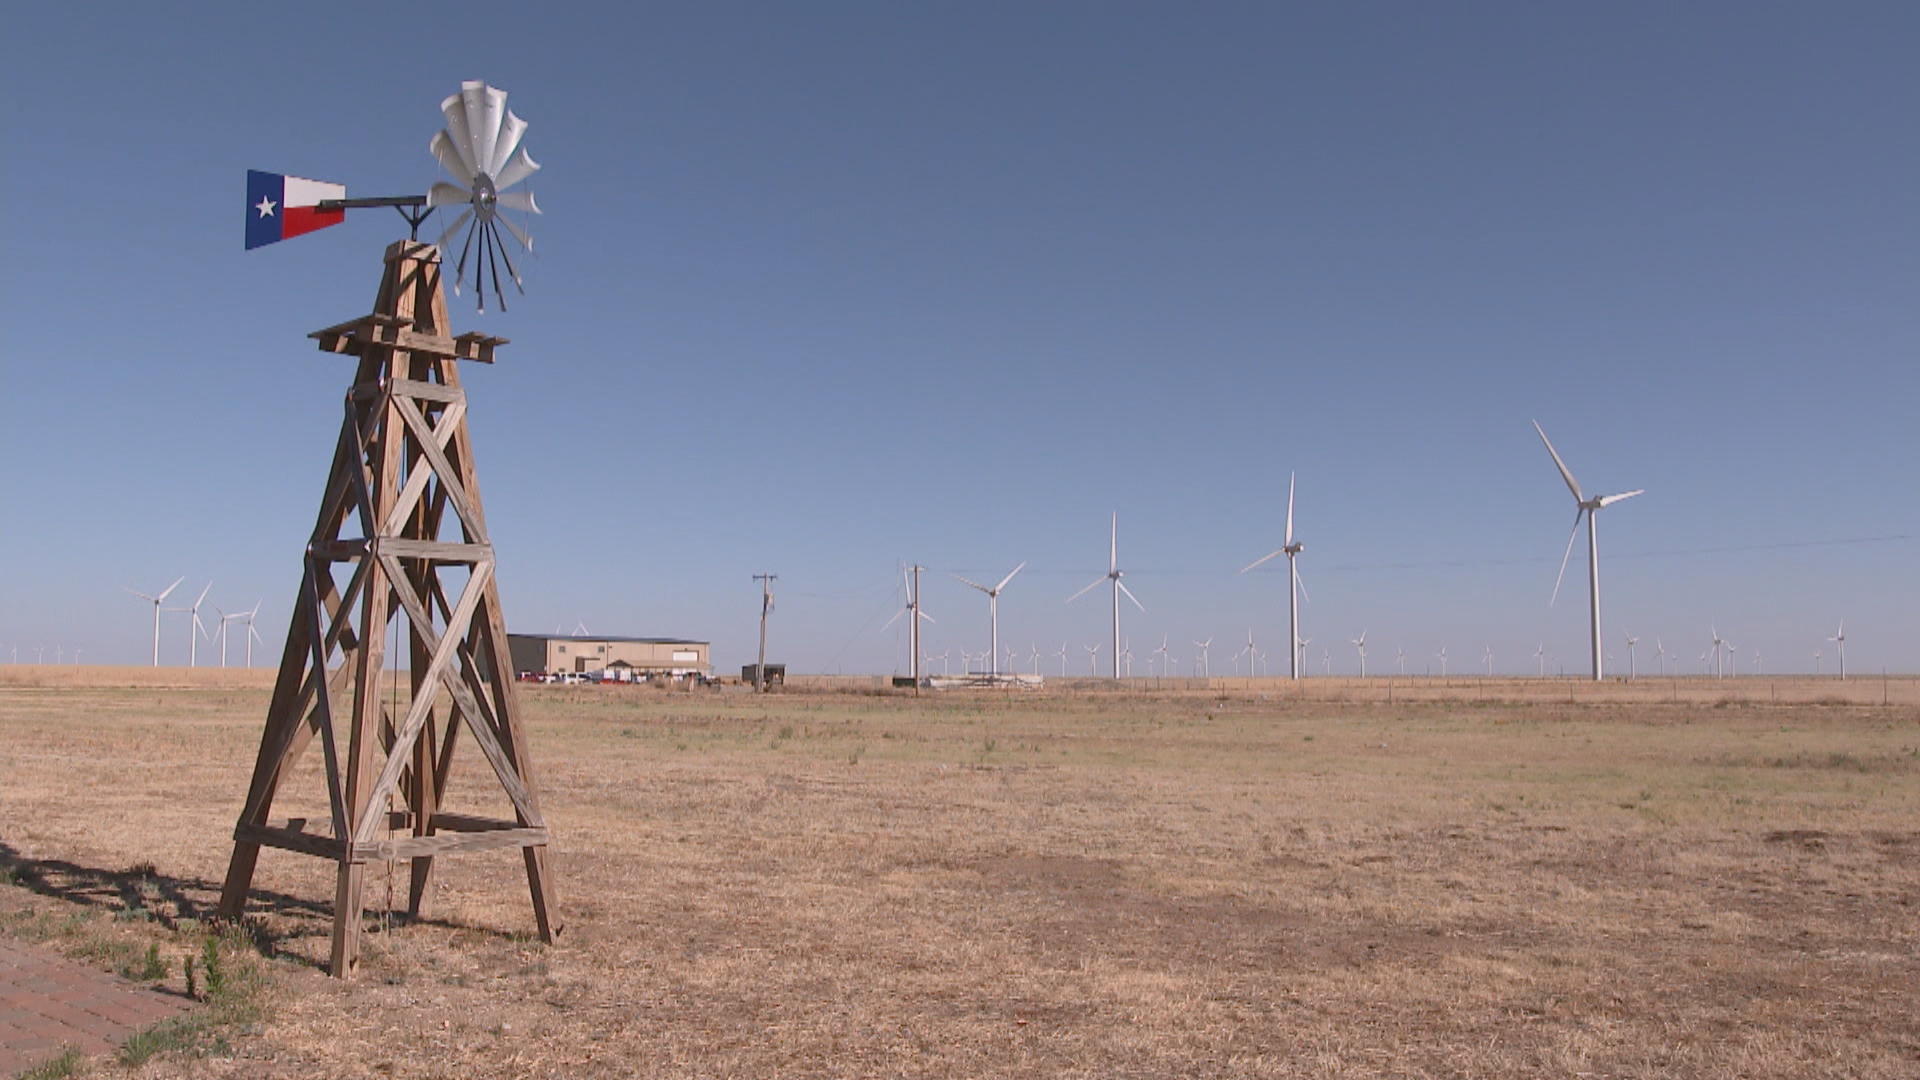 Figure 1. A Wind Farm in TX. With fast growing industry, wind electricity in Texas is slowly outpacing coal. (Source: CBS News, 2018)